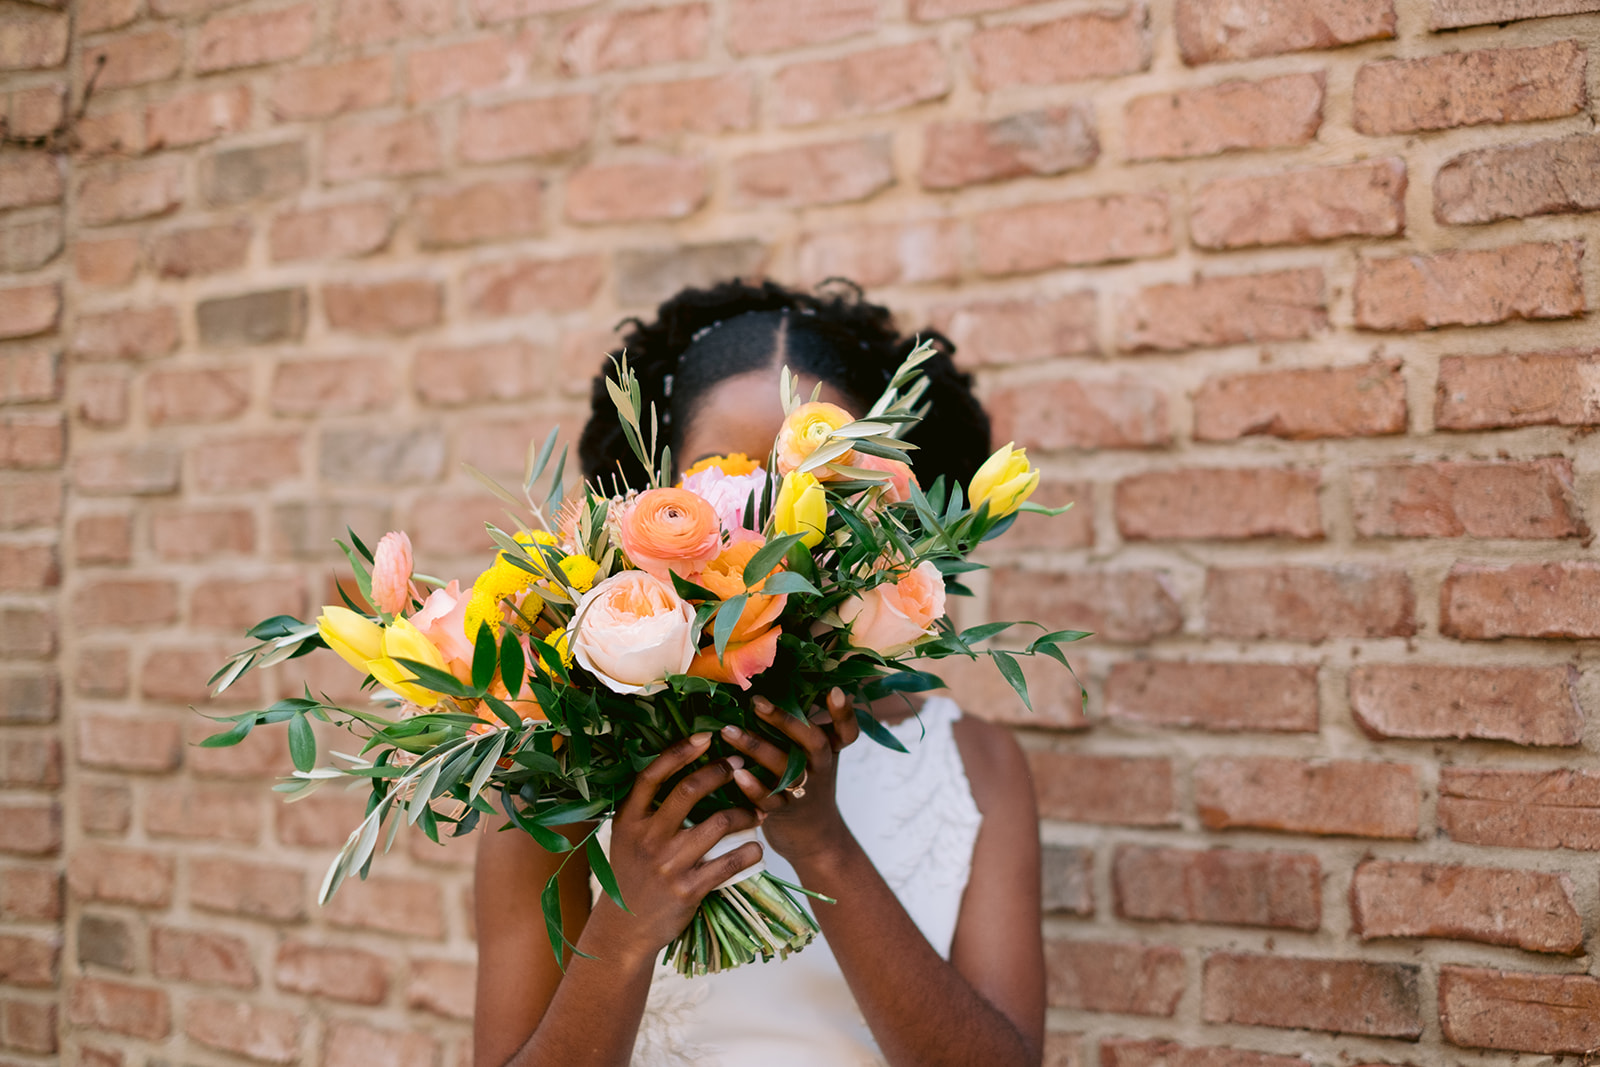 Bride holding her colorful sunset-inspired bouquet in front of her face.